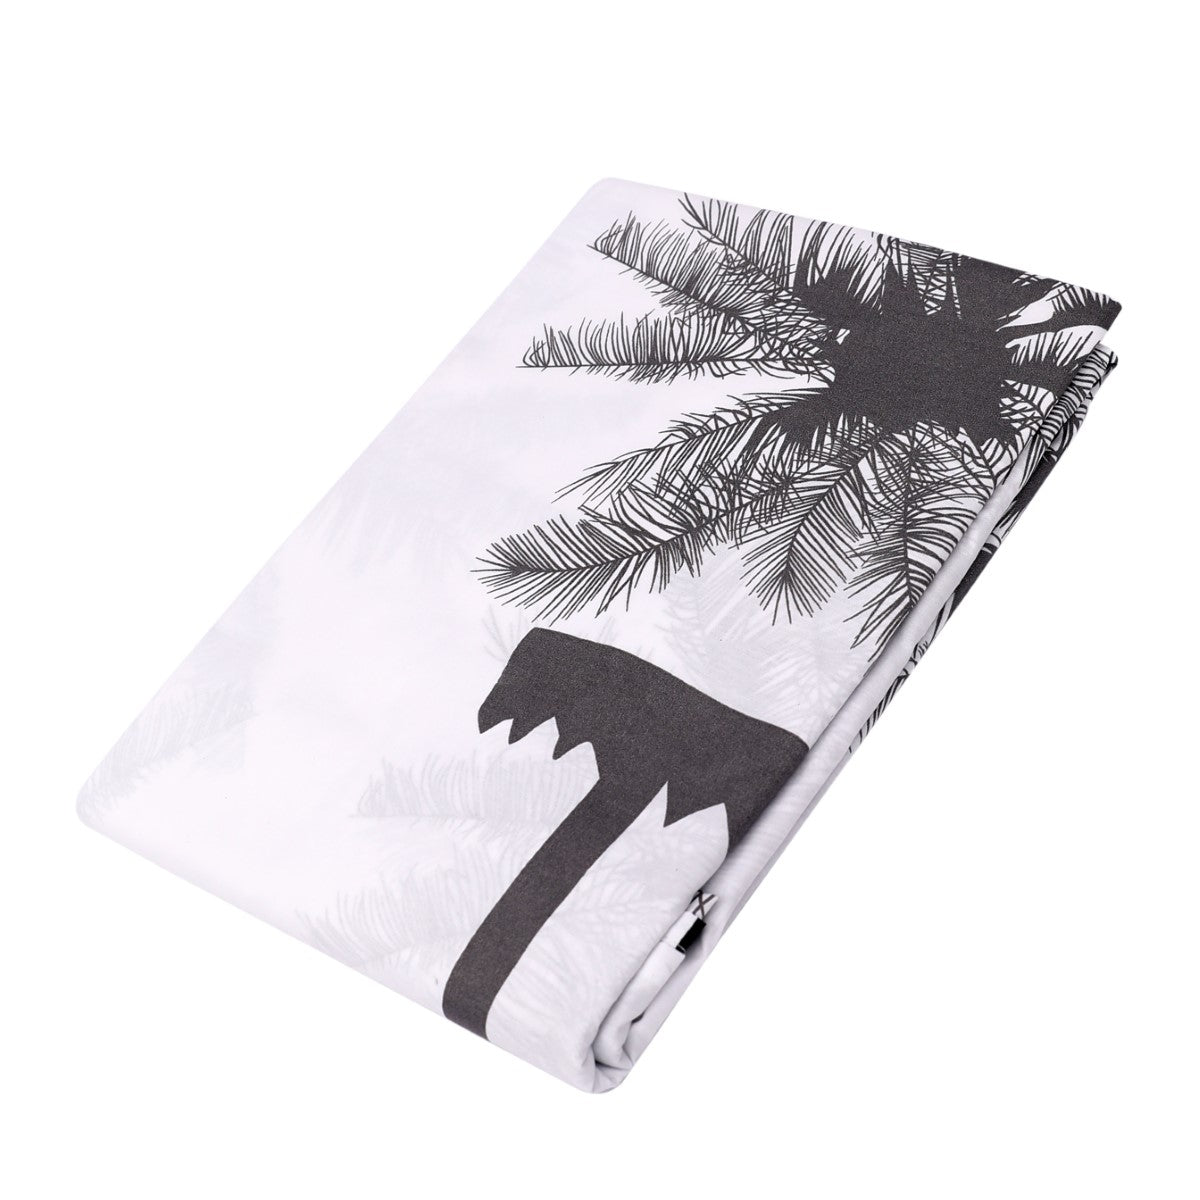 Plam Tree Greyscale Double Bed Sheet